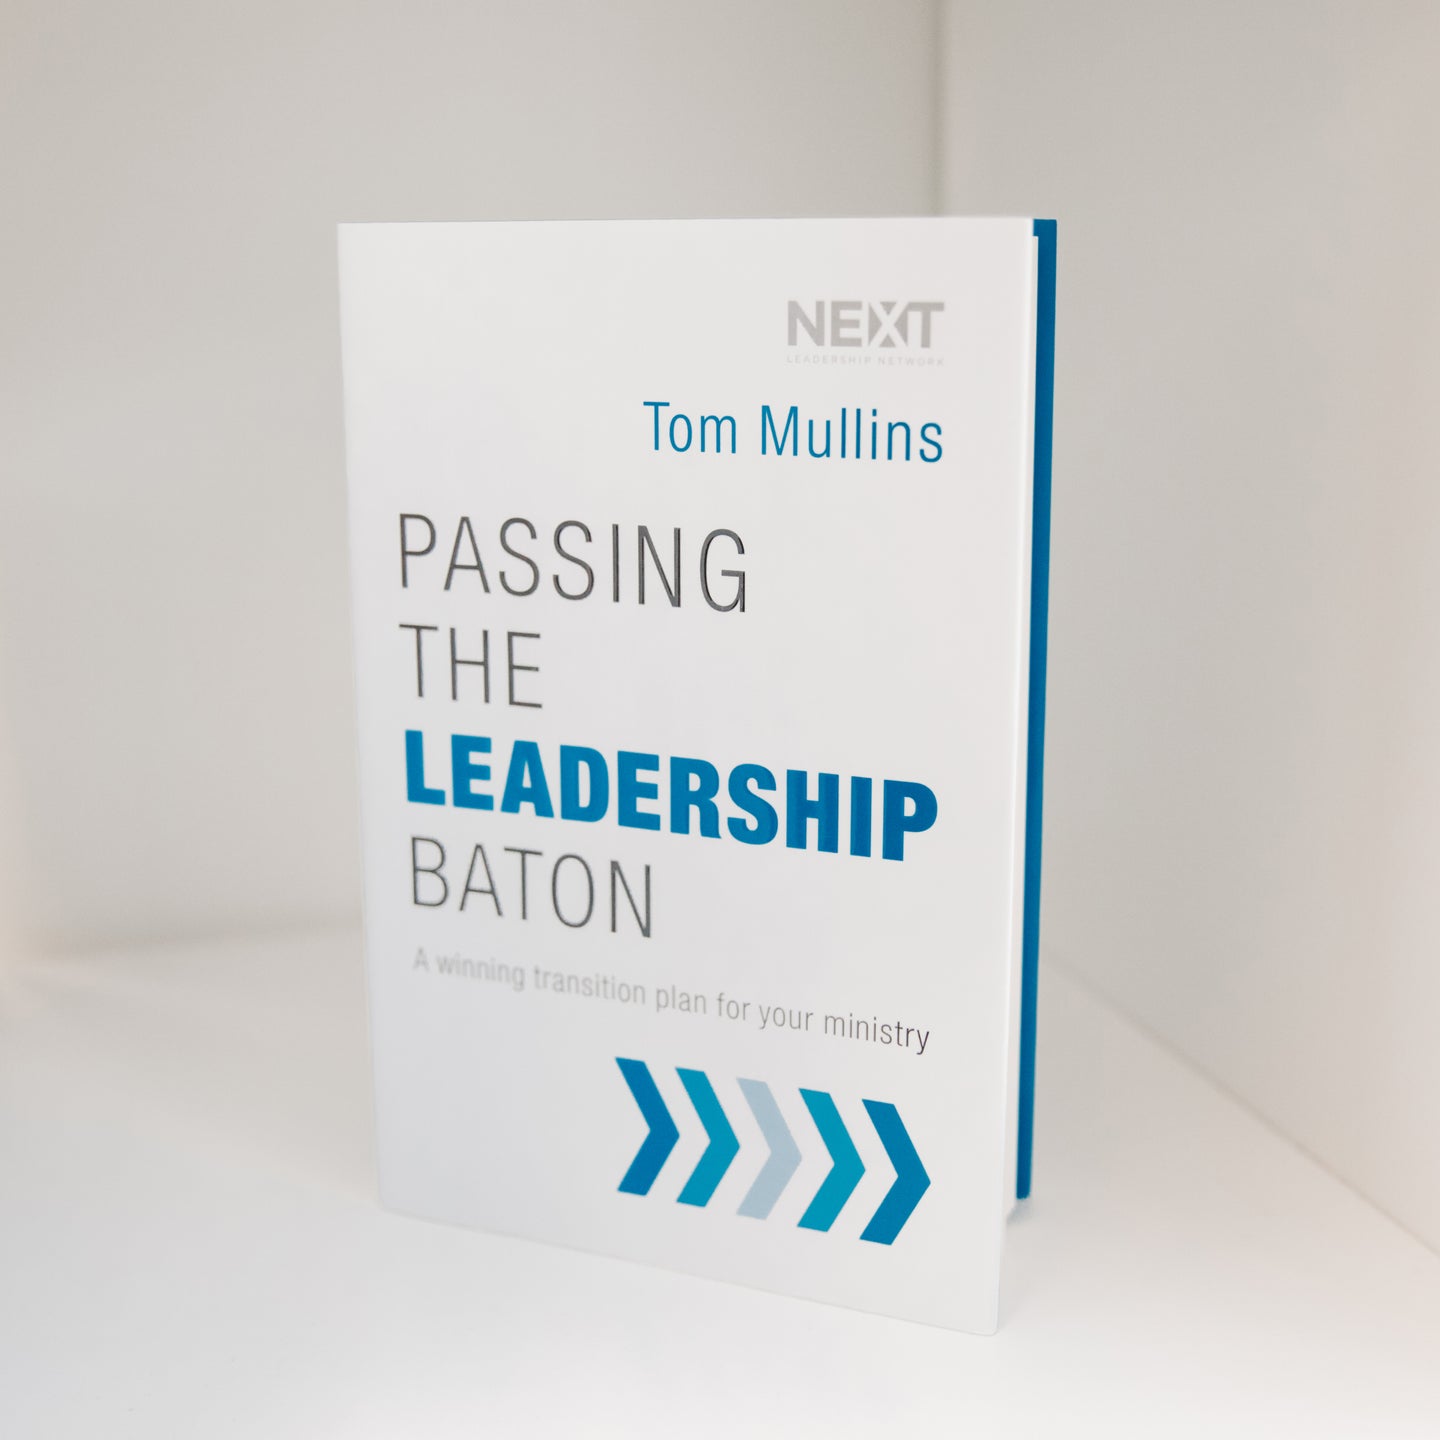 Passing the Leadership Baton by Dr. Tom Mullins